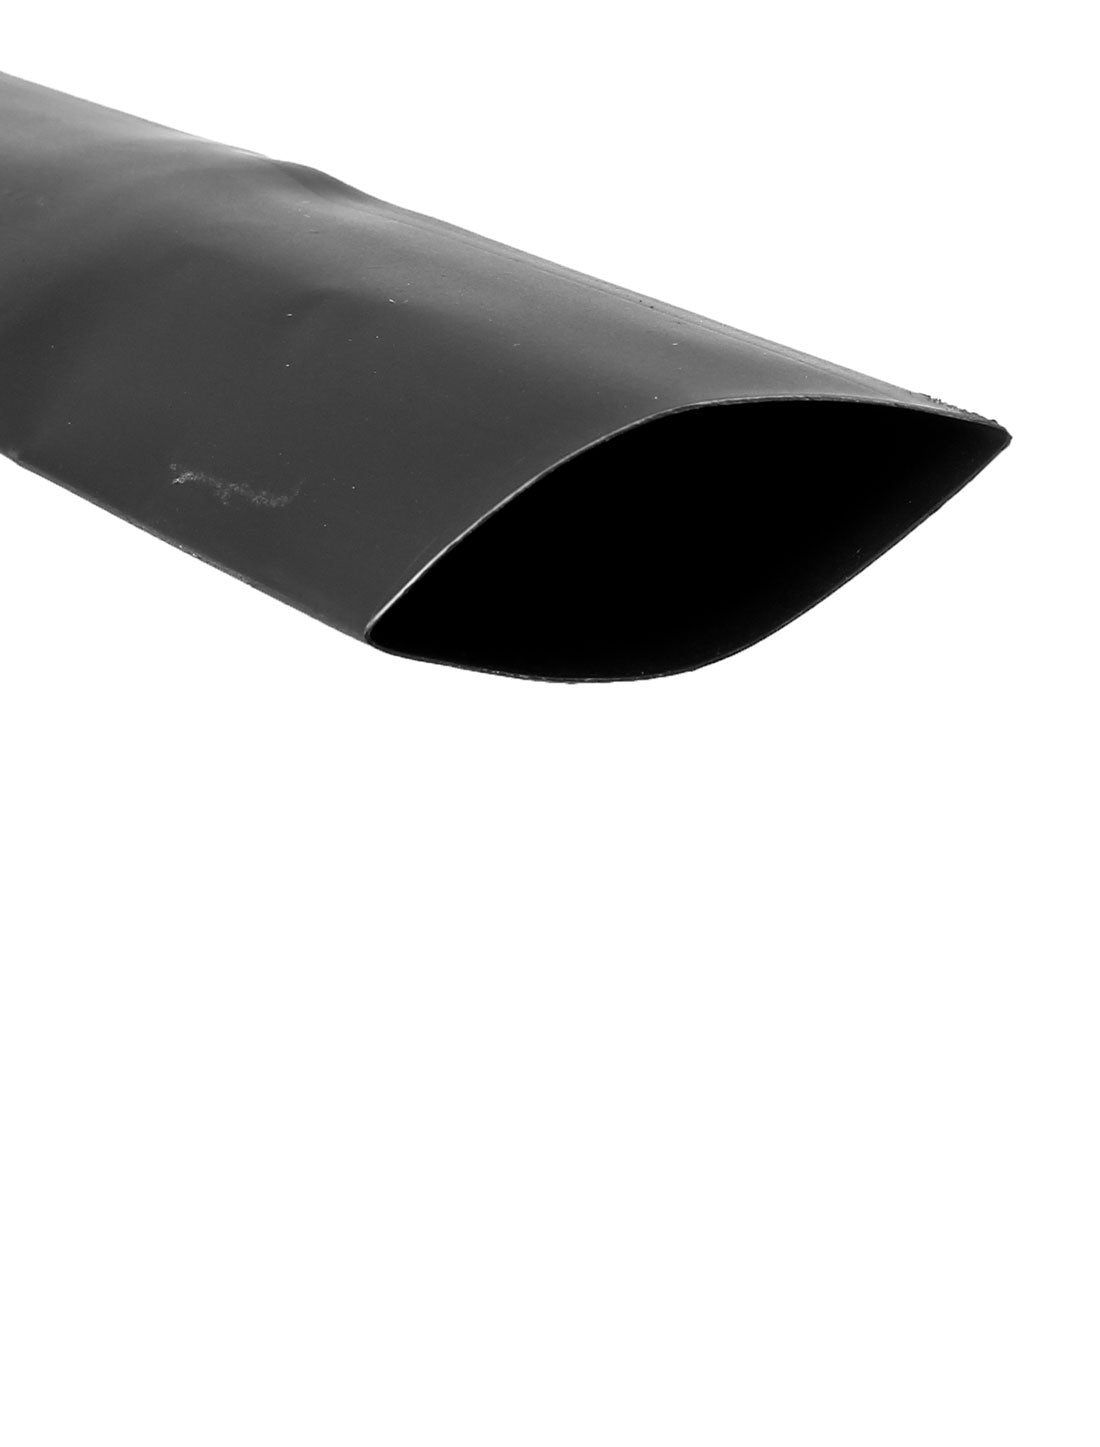 uxcell Uxcell 1 Meter 25mm Dia 42mm Flat Width Ratio 2:1 Heat Shrinkable Shrinking Tube Black